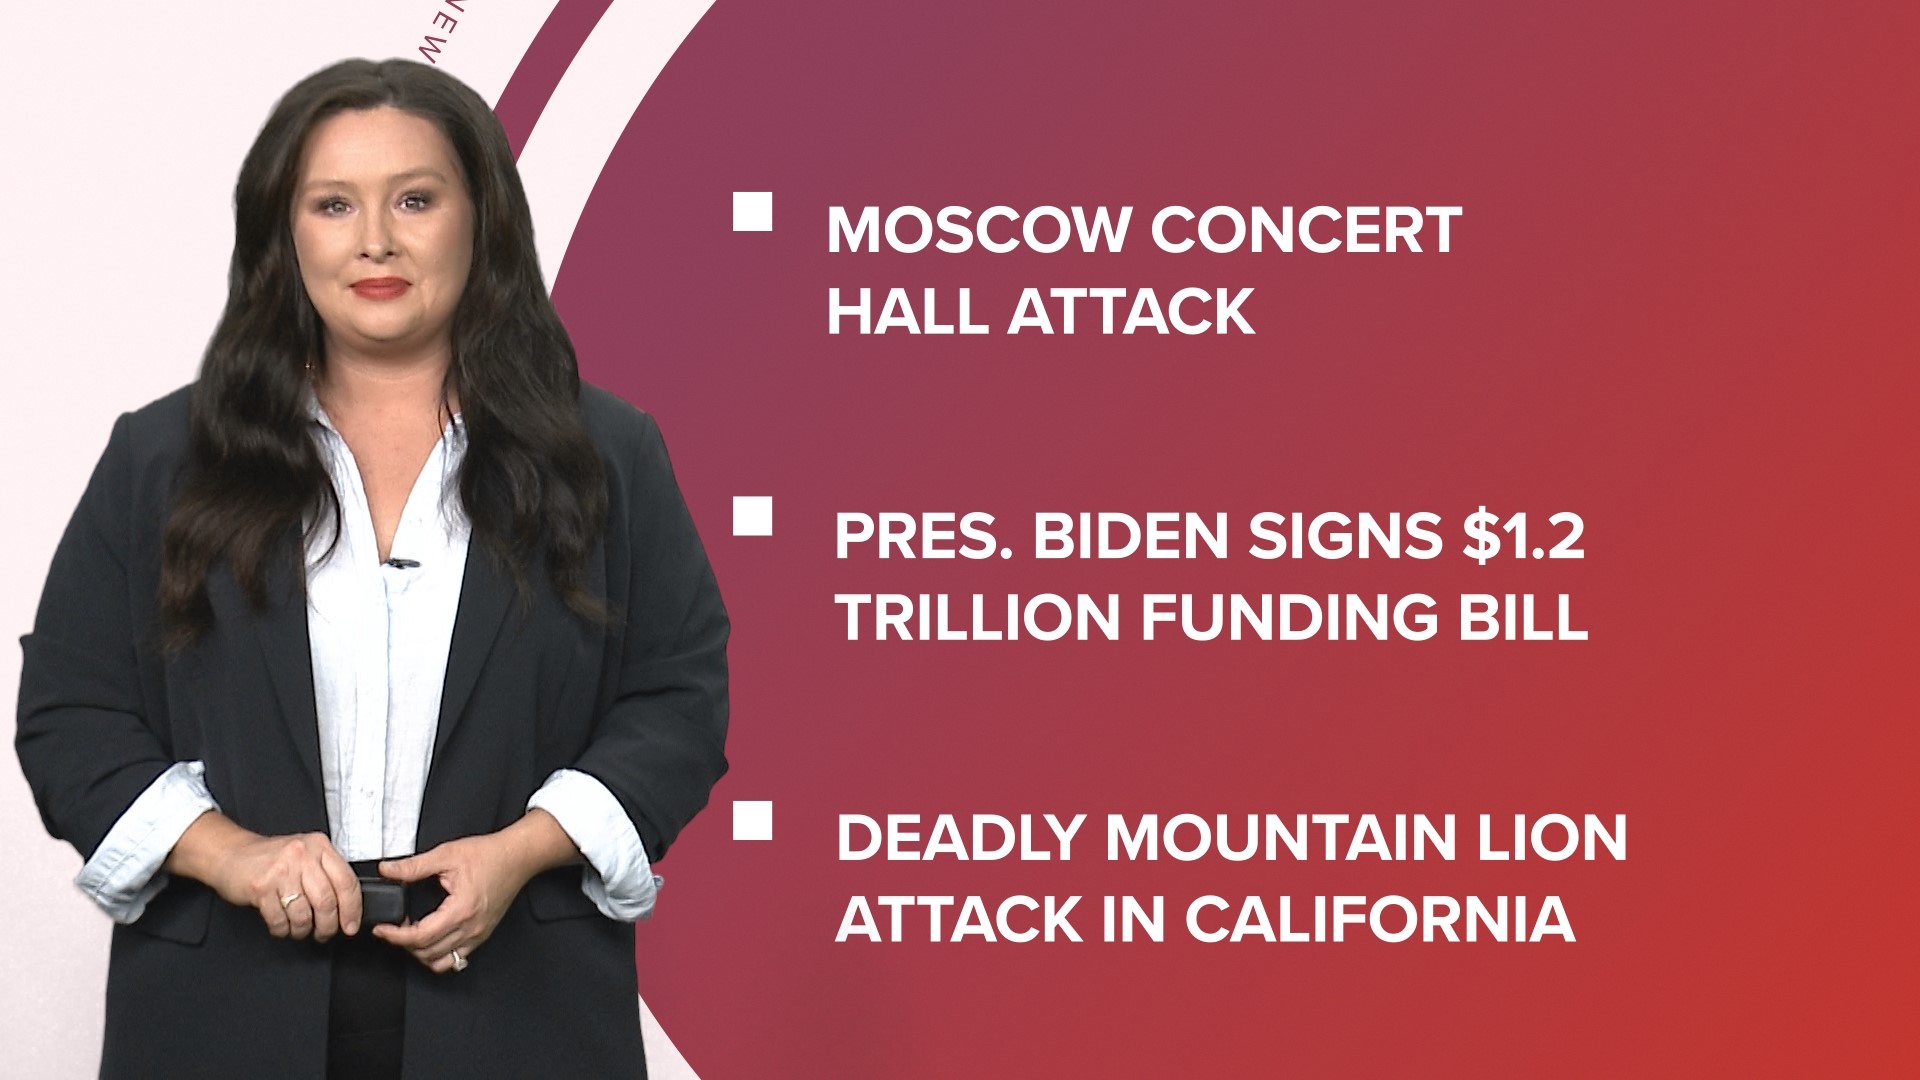 A look at what is happening in the news from latest on concert attack in Russia to a deadly mountain lion attack  and Chick-fil-A changes its antibiotic rules.